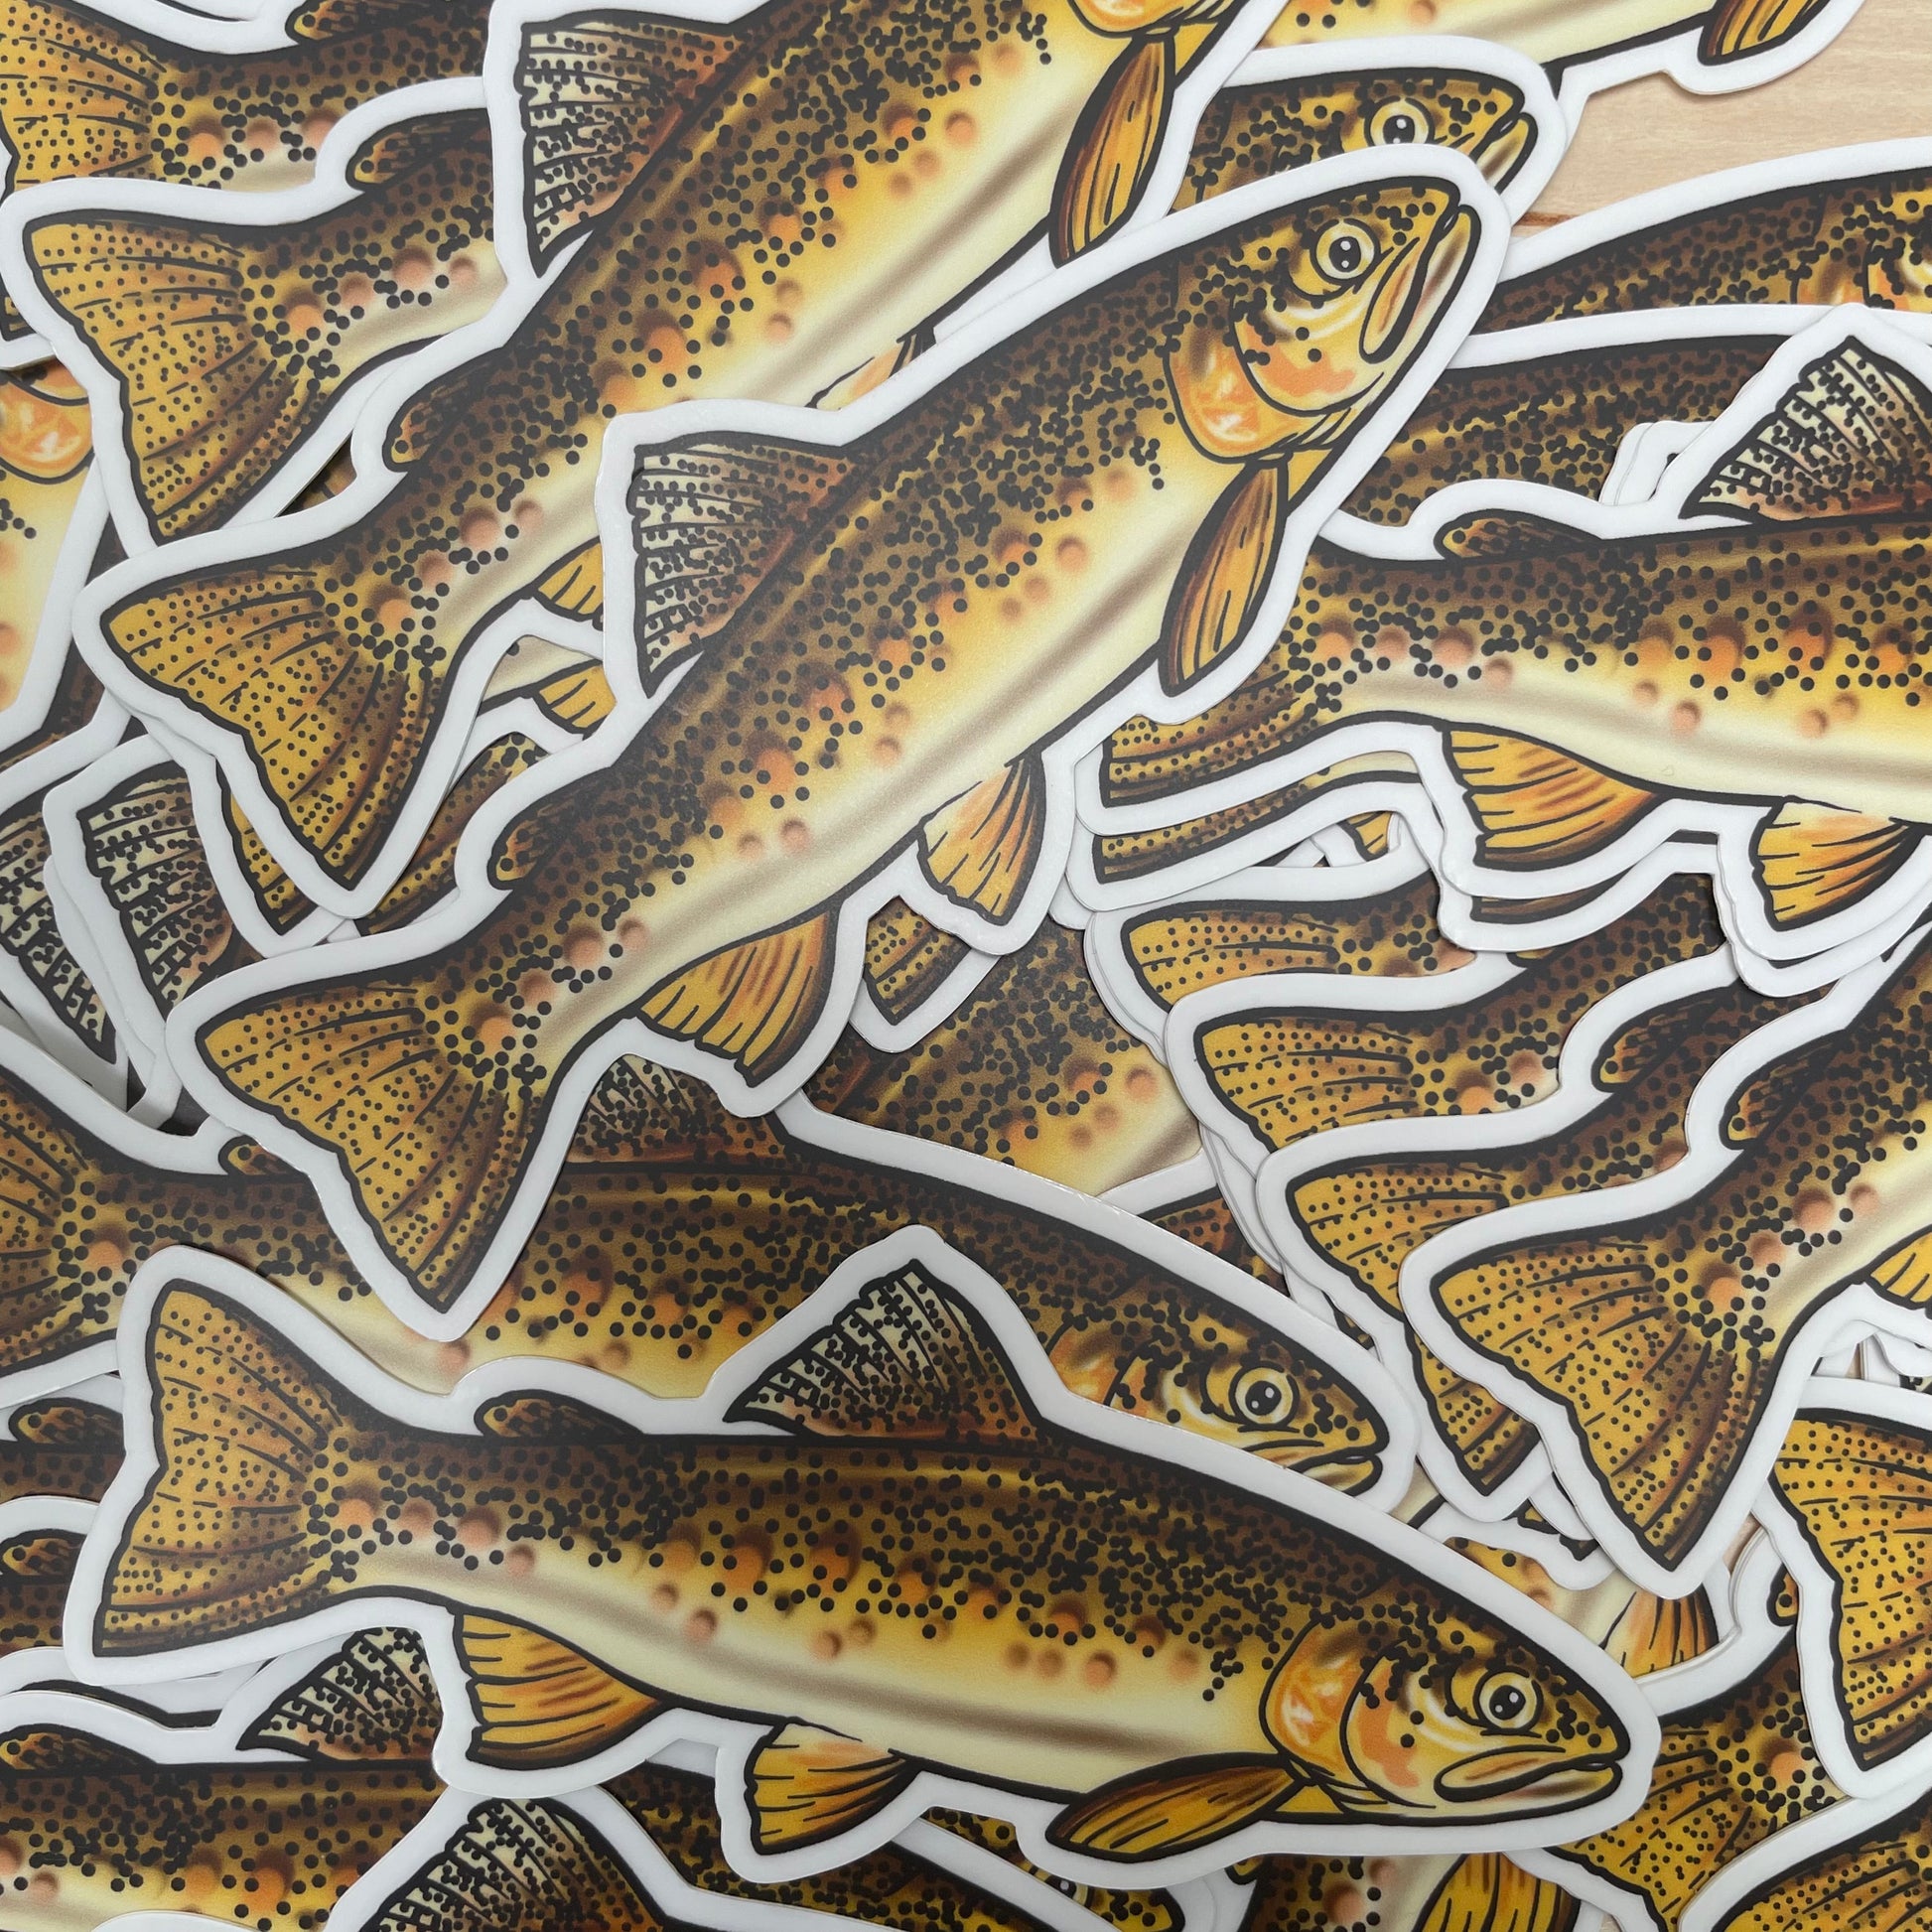 Limited Edition Gila Trout Fly Fishing Sticker - thecosmicstream